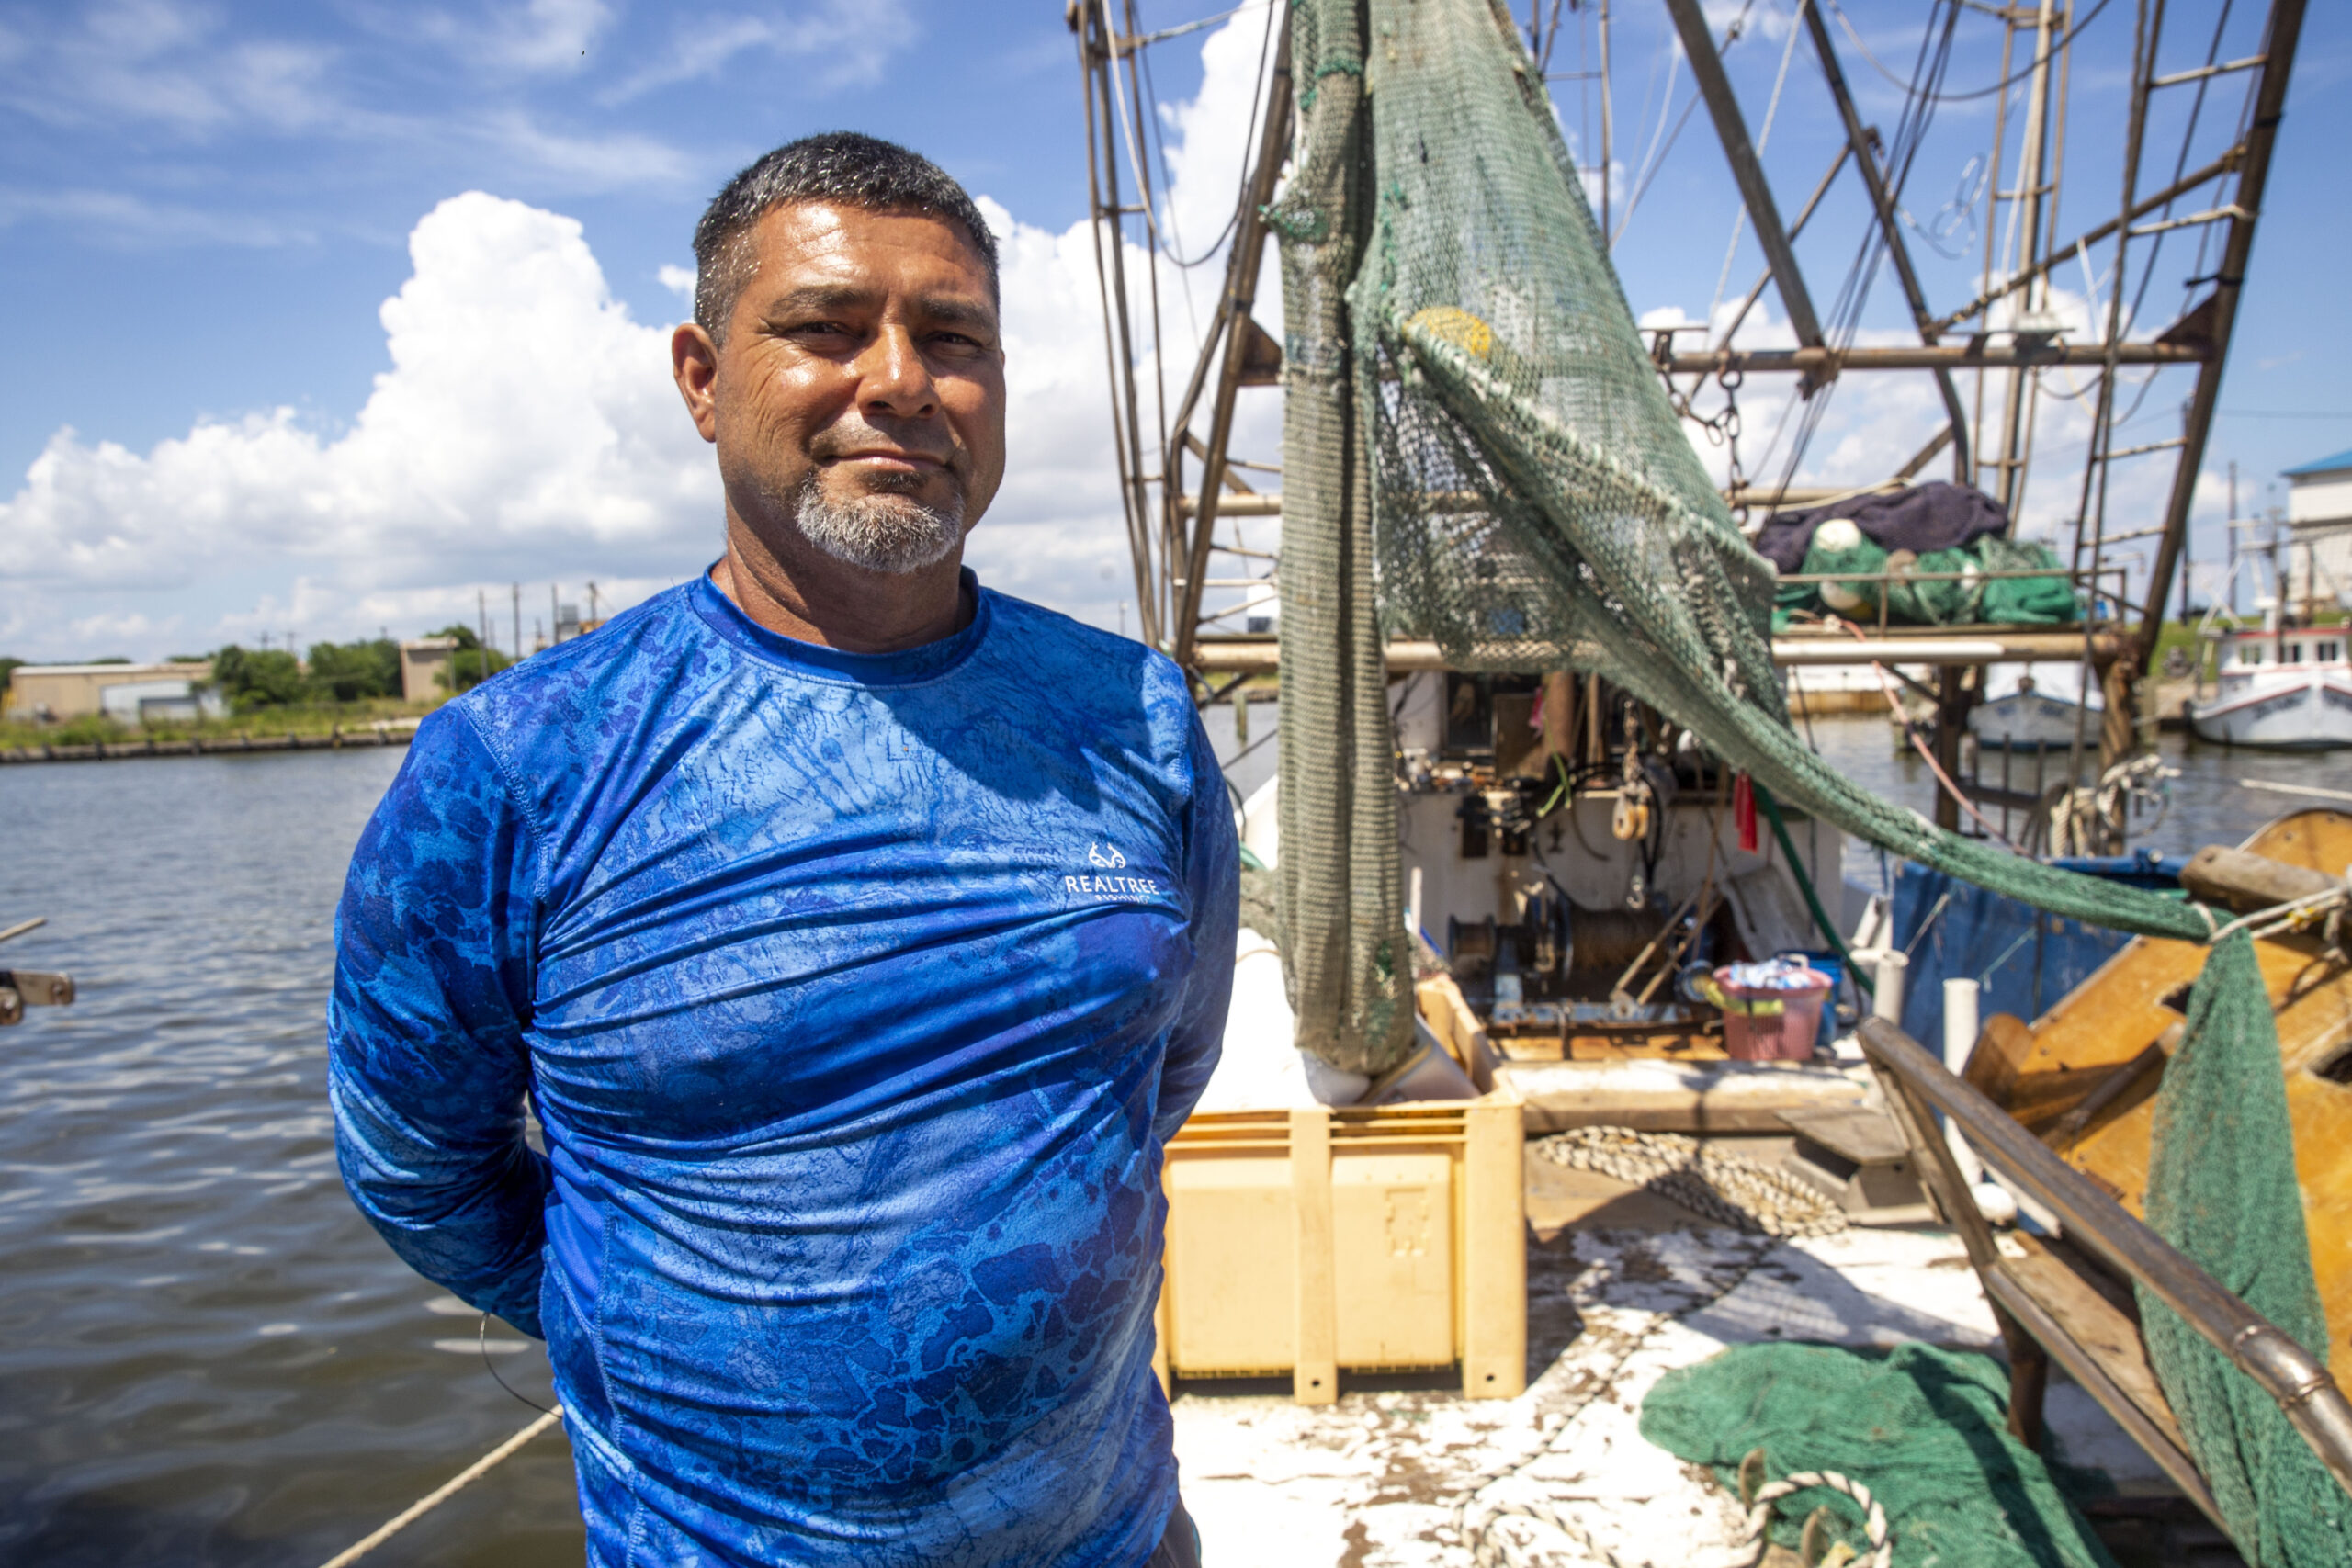 Maurico Blanco is a Latino man posing in a blue shirt, proudly showing off the rigging of his shirmping boat with the waters of Lavaca Bay, photographed under a partly cloudy sky, behind him.